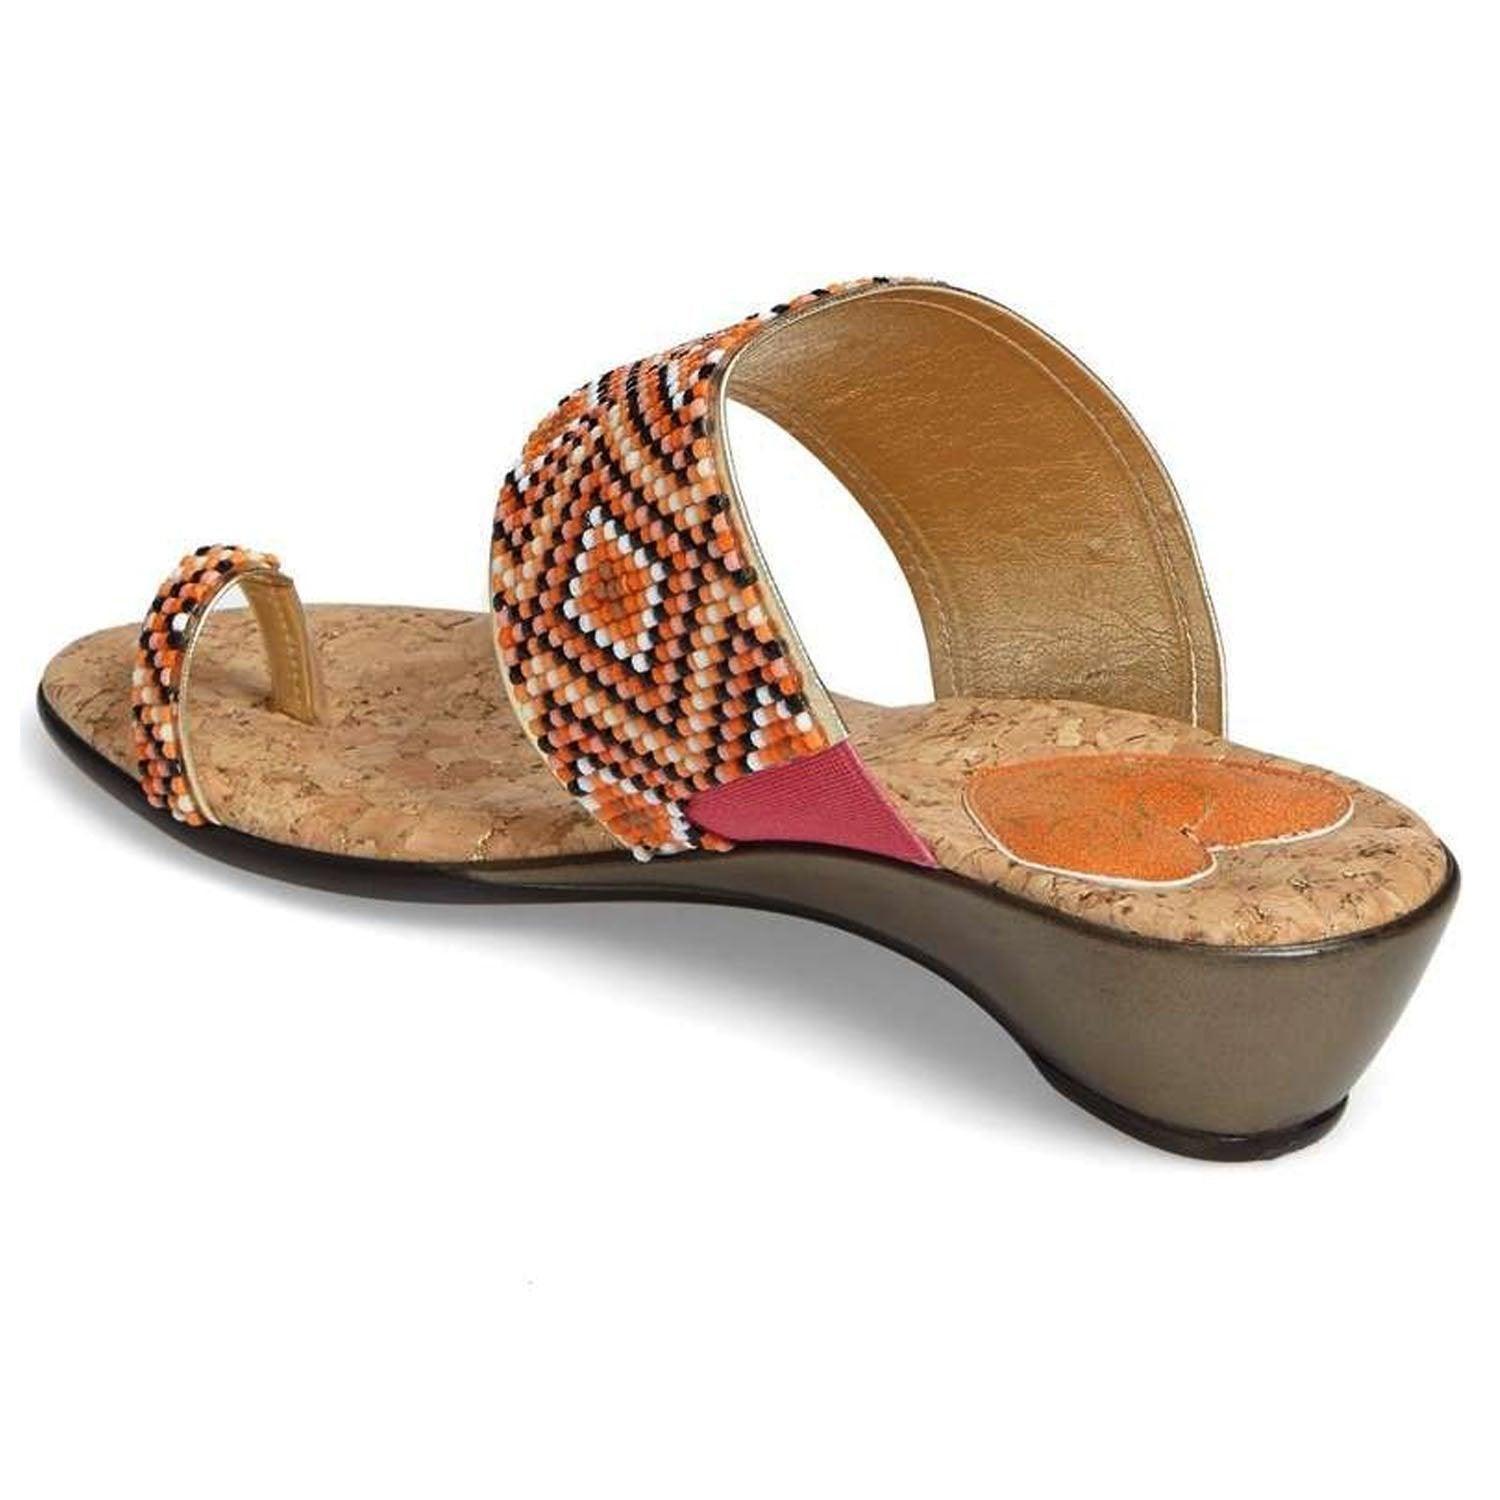 Women's Shoes - Sandals Diamond Pattern Coastal Sandals One Band & Toe Ring Shoes